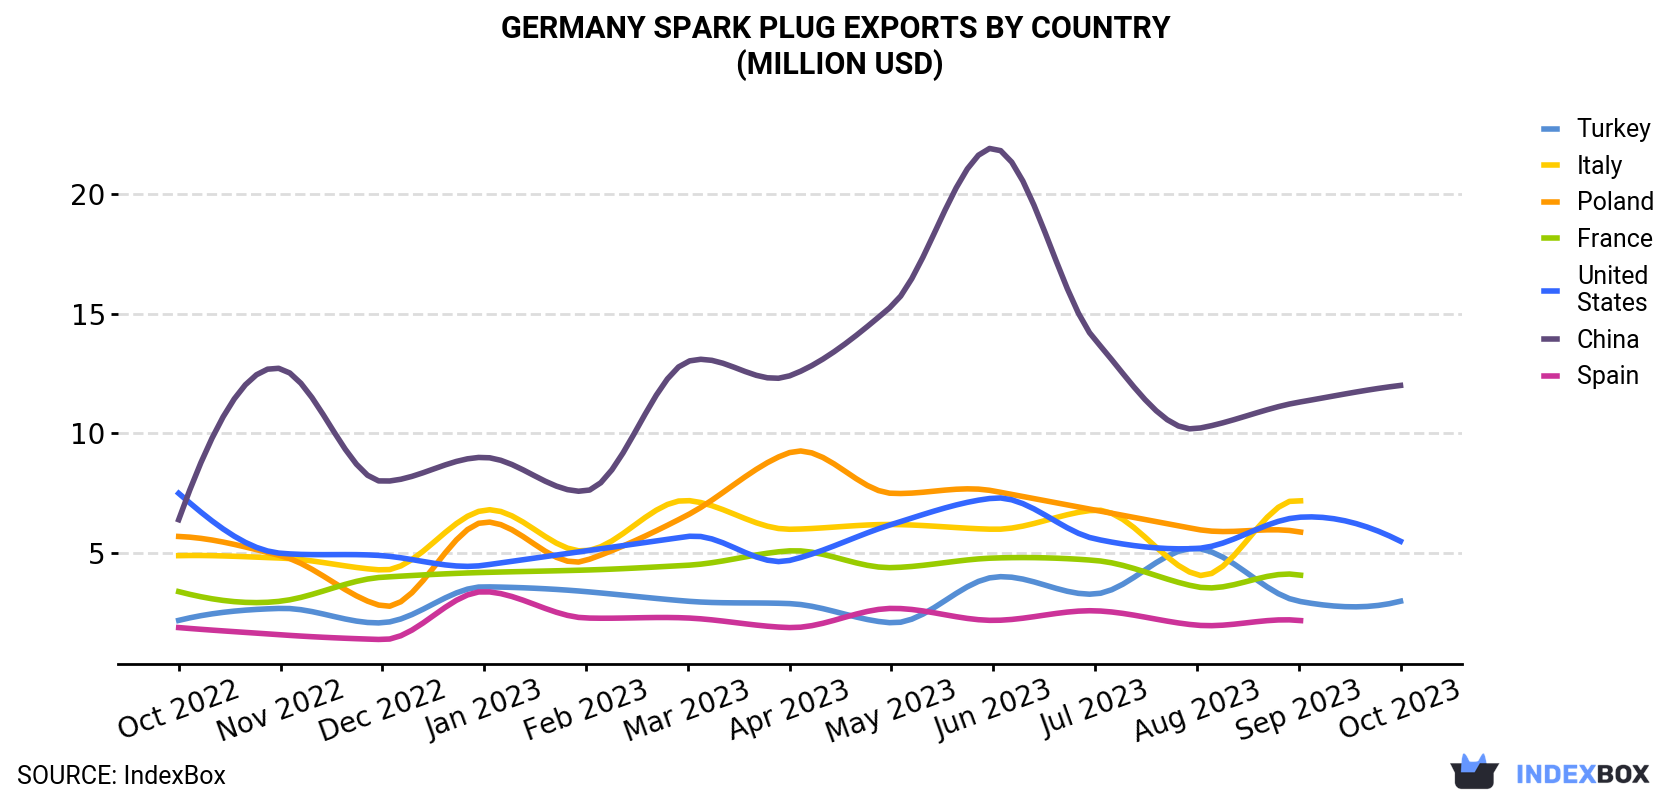 Germany Spark Plug Exports By Country (Million USD)